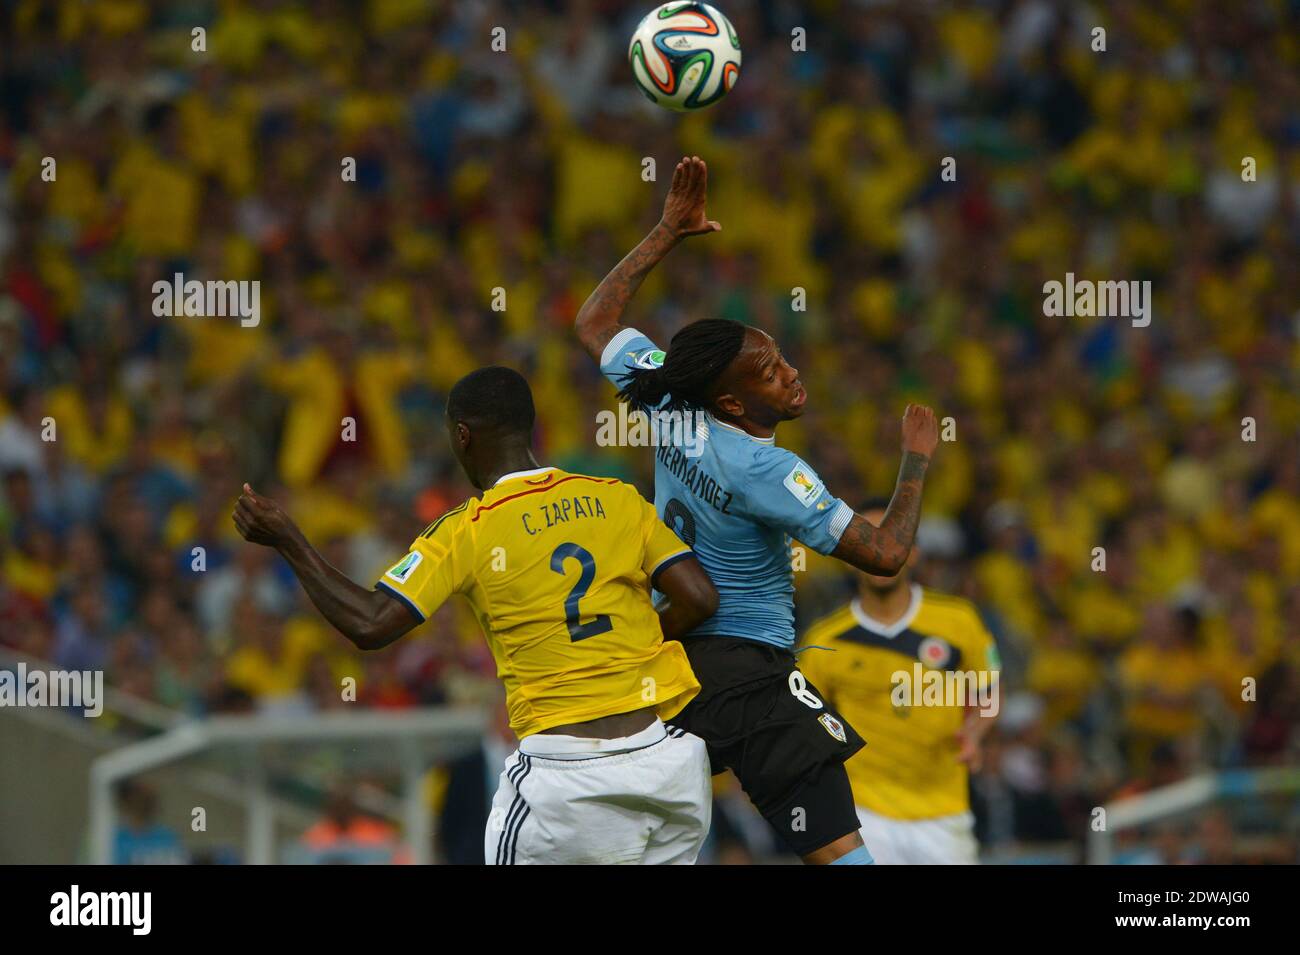 Colombia's Cristian Zapata battling Uruguay's Abel Hernandez during Soccer World Cup 2014 1/8 of final round match Colombia v Uruguay at Maracana Stadium, Rio de Janeiro, Brazil on June 28, 2014. Colombia won 2-0. Photo by Henri Szwarc/ABACAPRESS.COM Stock Photo